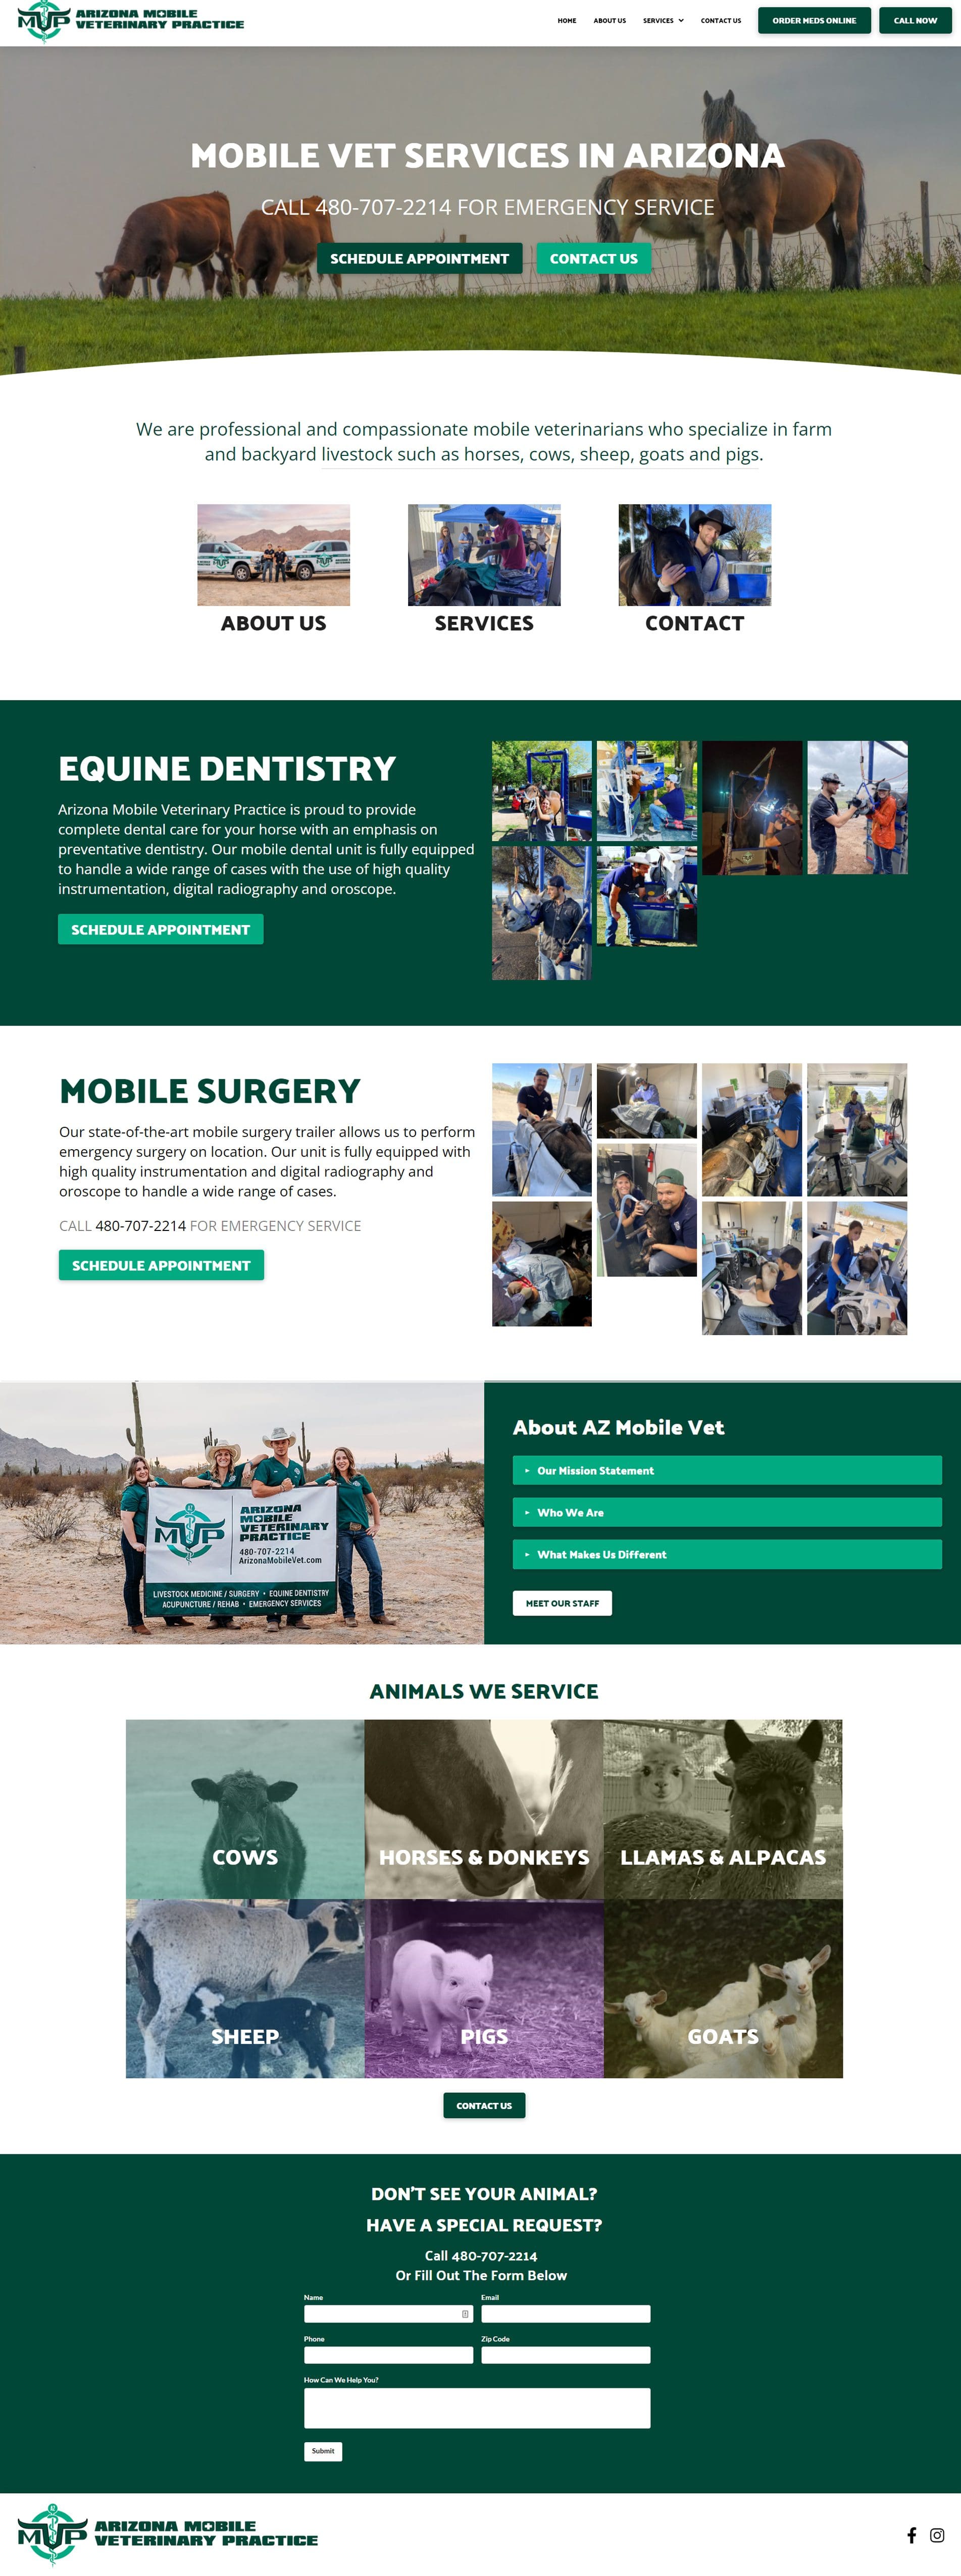 Featured image for “Arizona Mobile Vet”